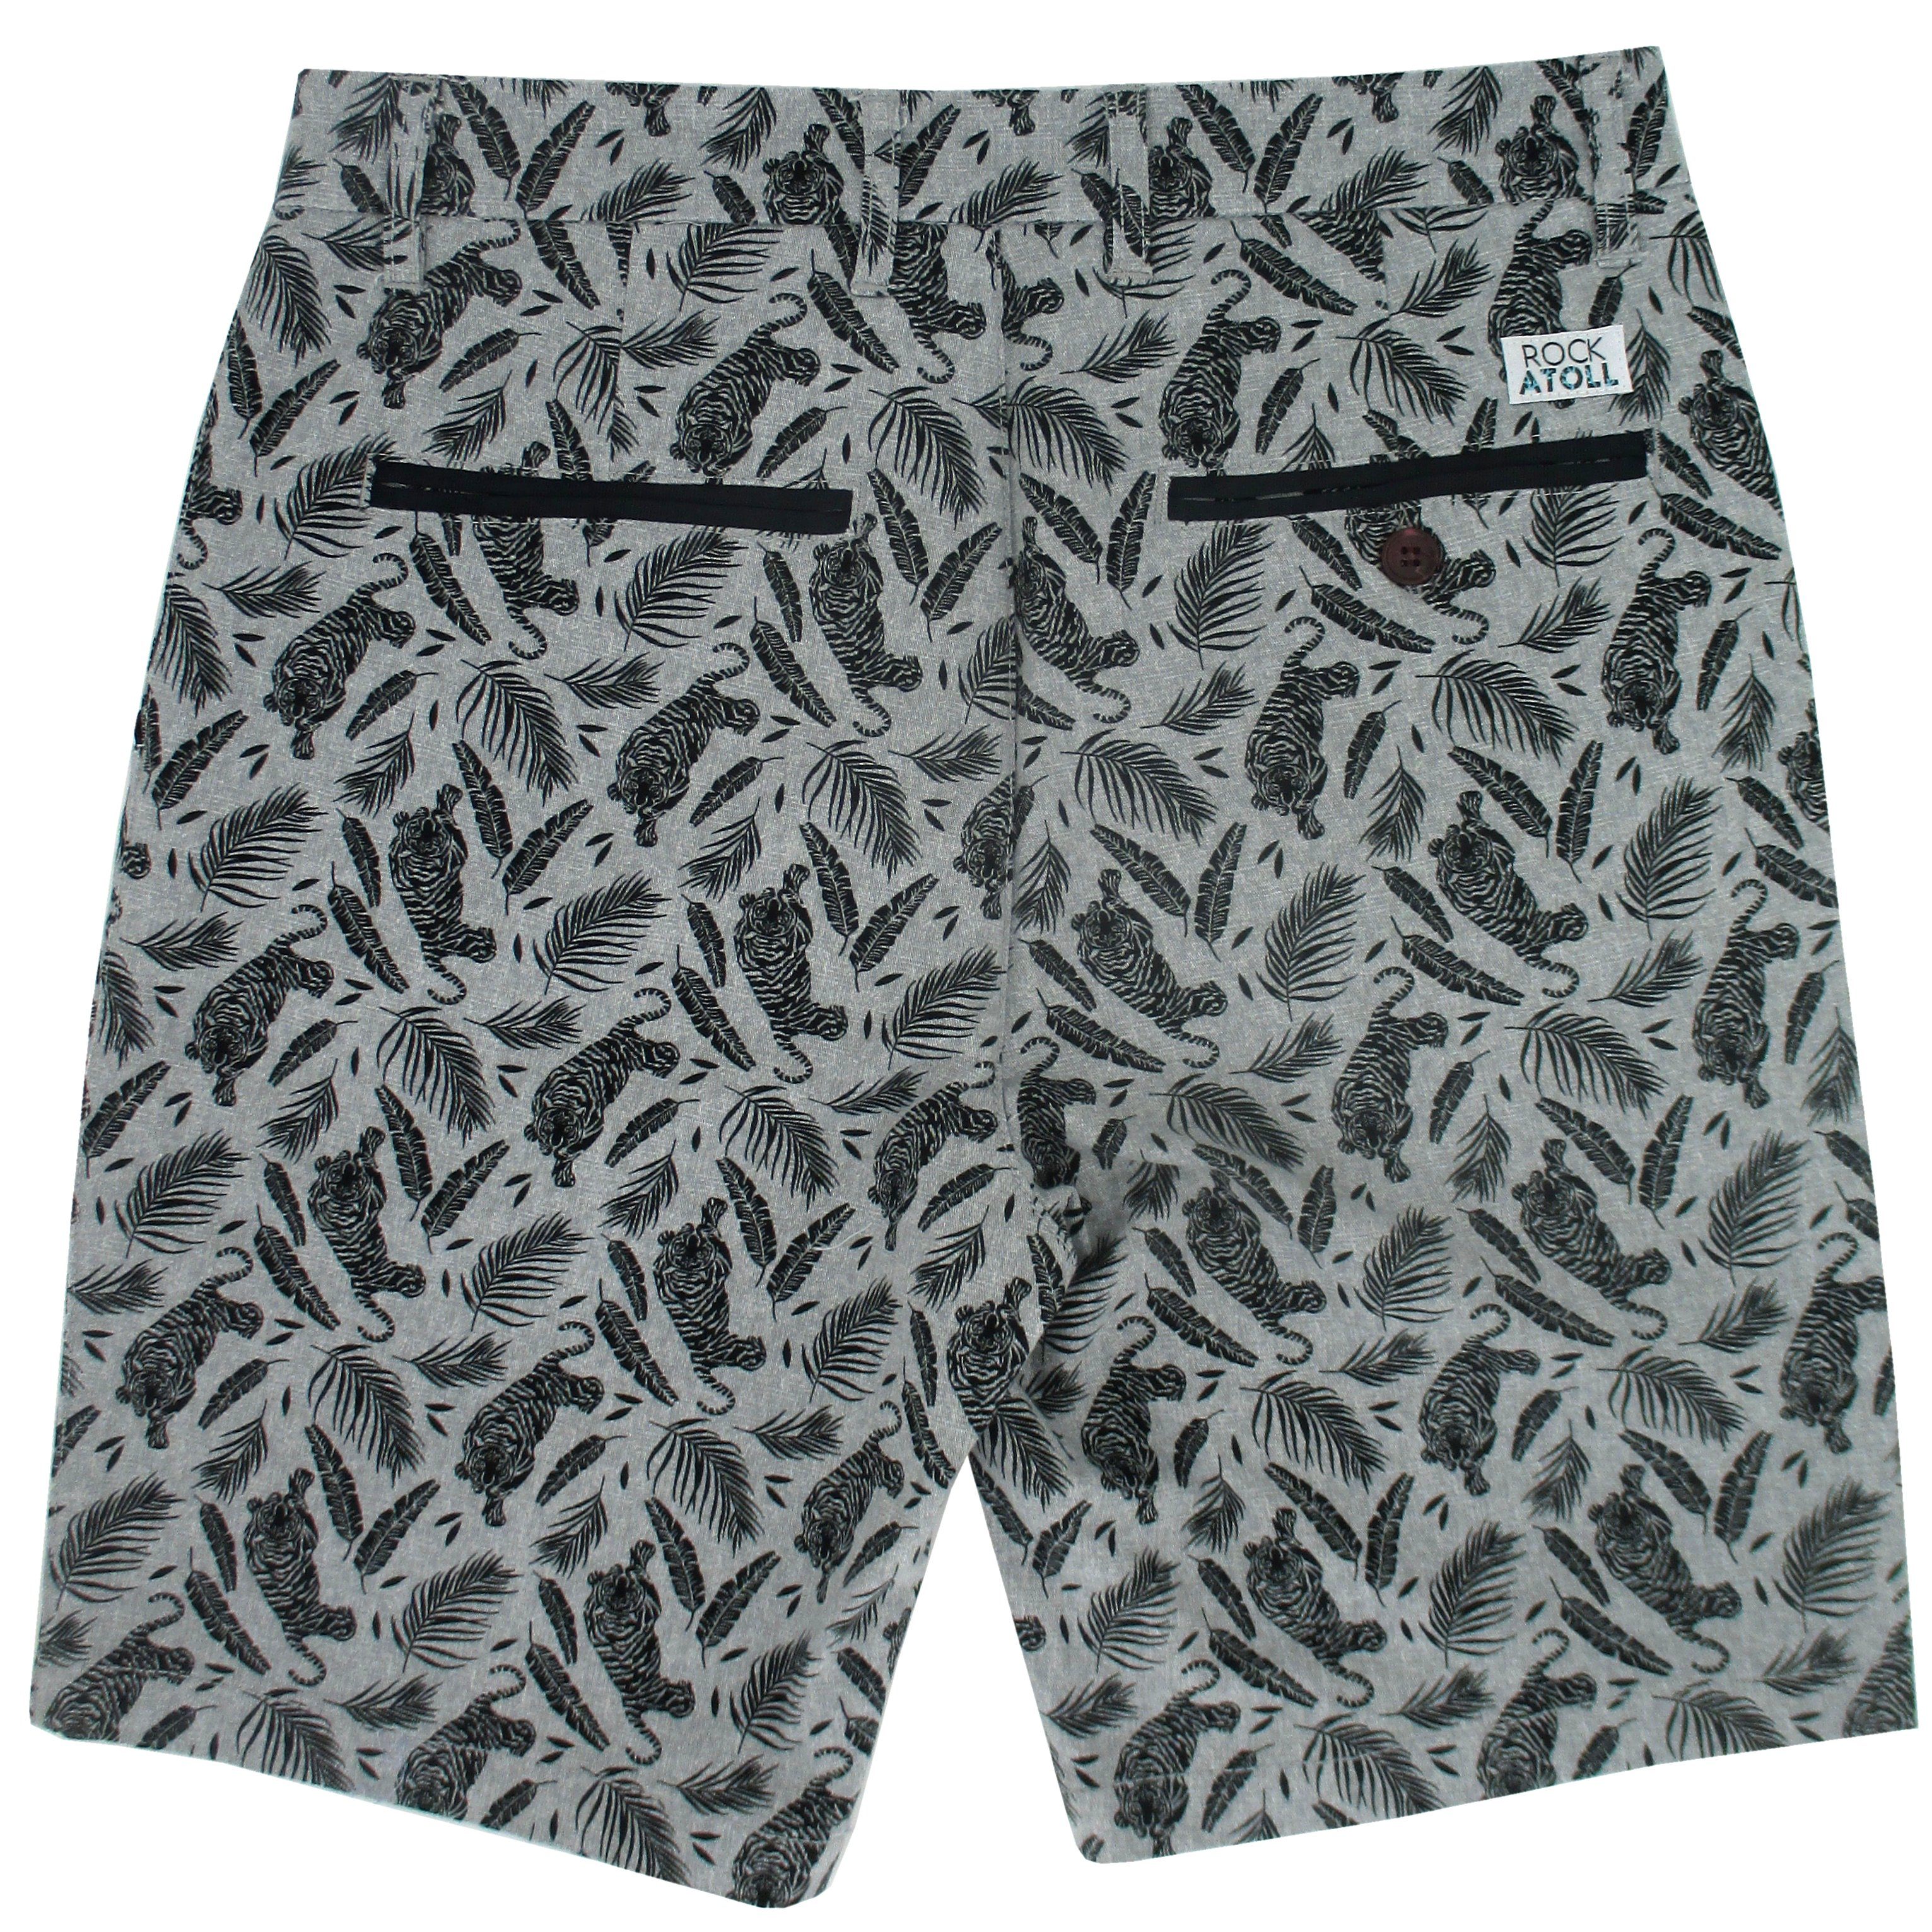 Rock Atoll Classic Fit Men's Chino Going Out Shorts with Tigers All Over Them